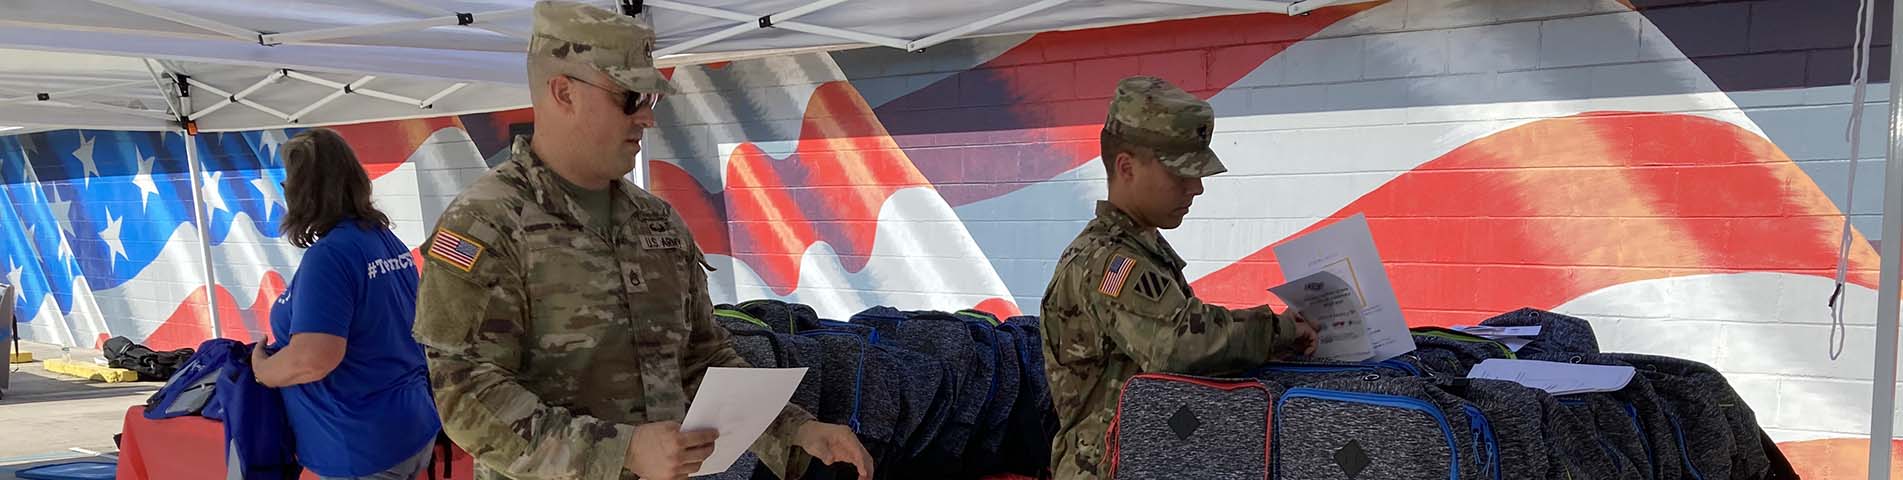 Two male service members counting backpacks outside